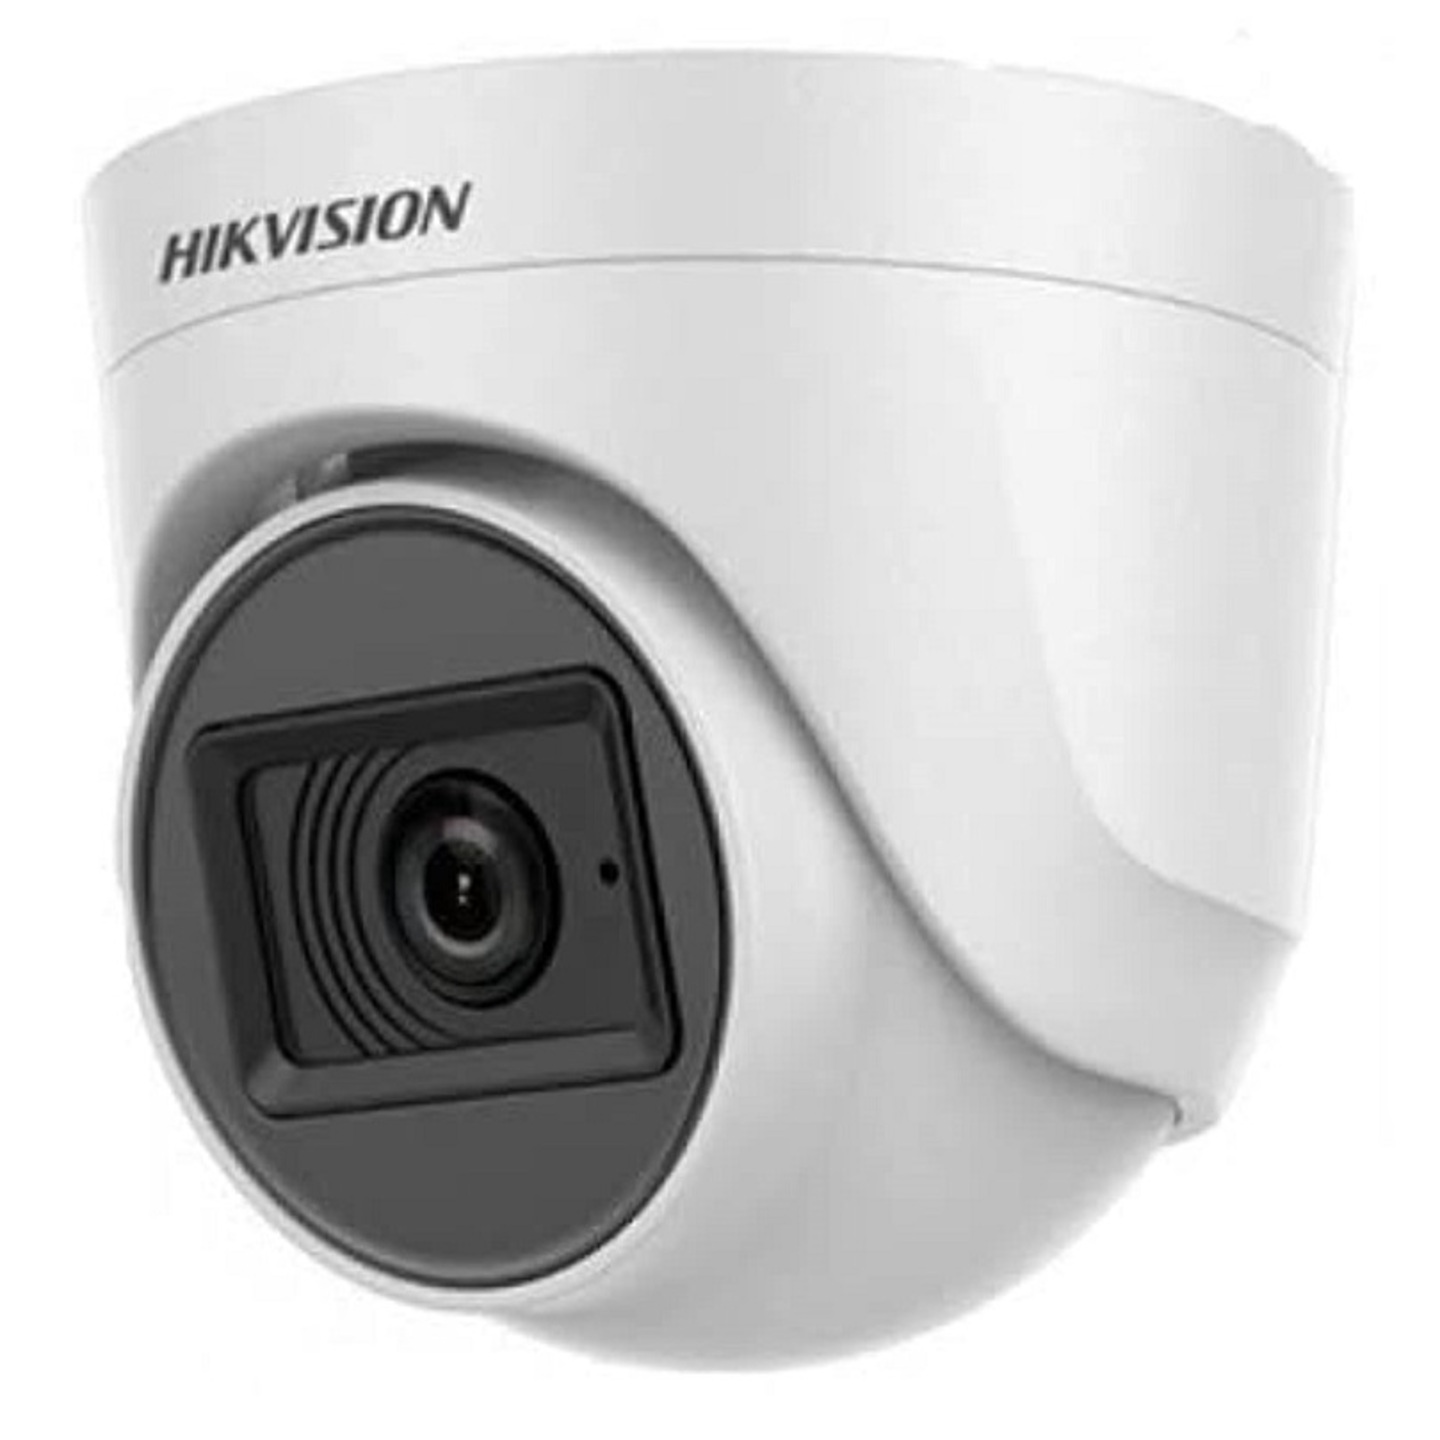 HiKVISION 2 MP Turbo HD CCTV Camera with built-in Mic Model - DS-2CE76D0T-ITPFS